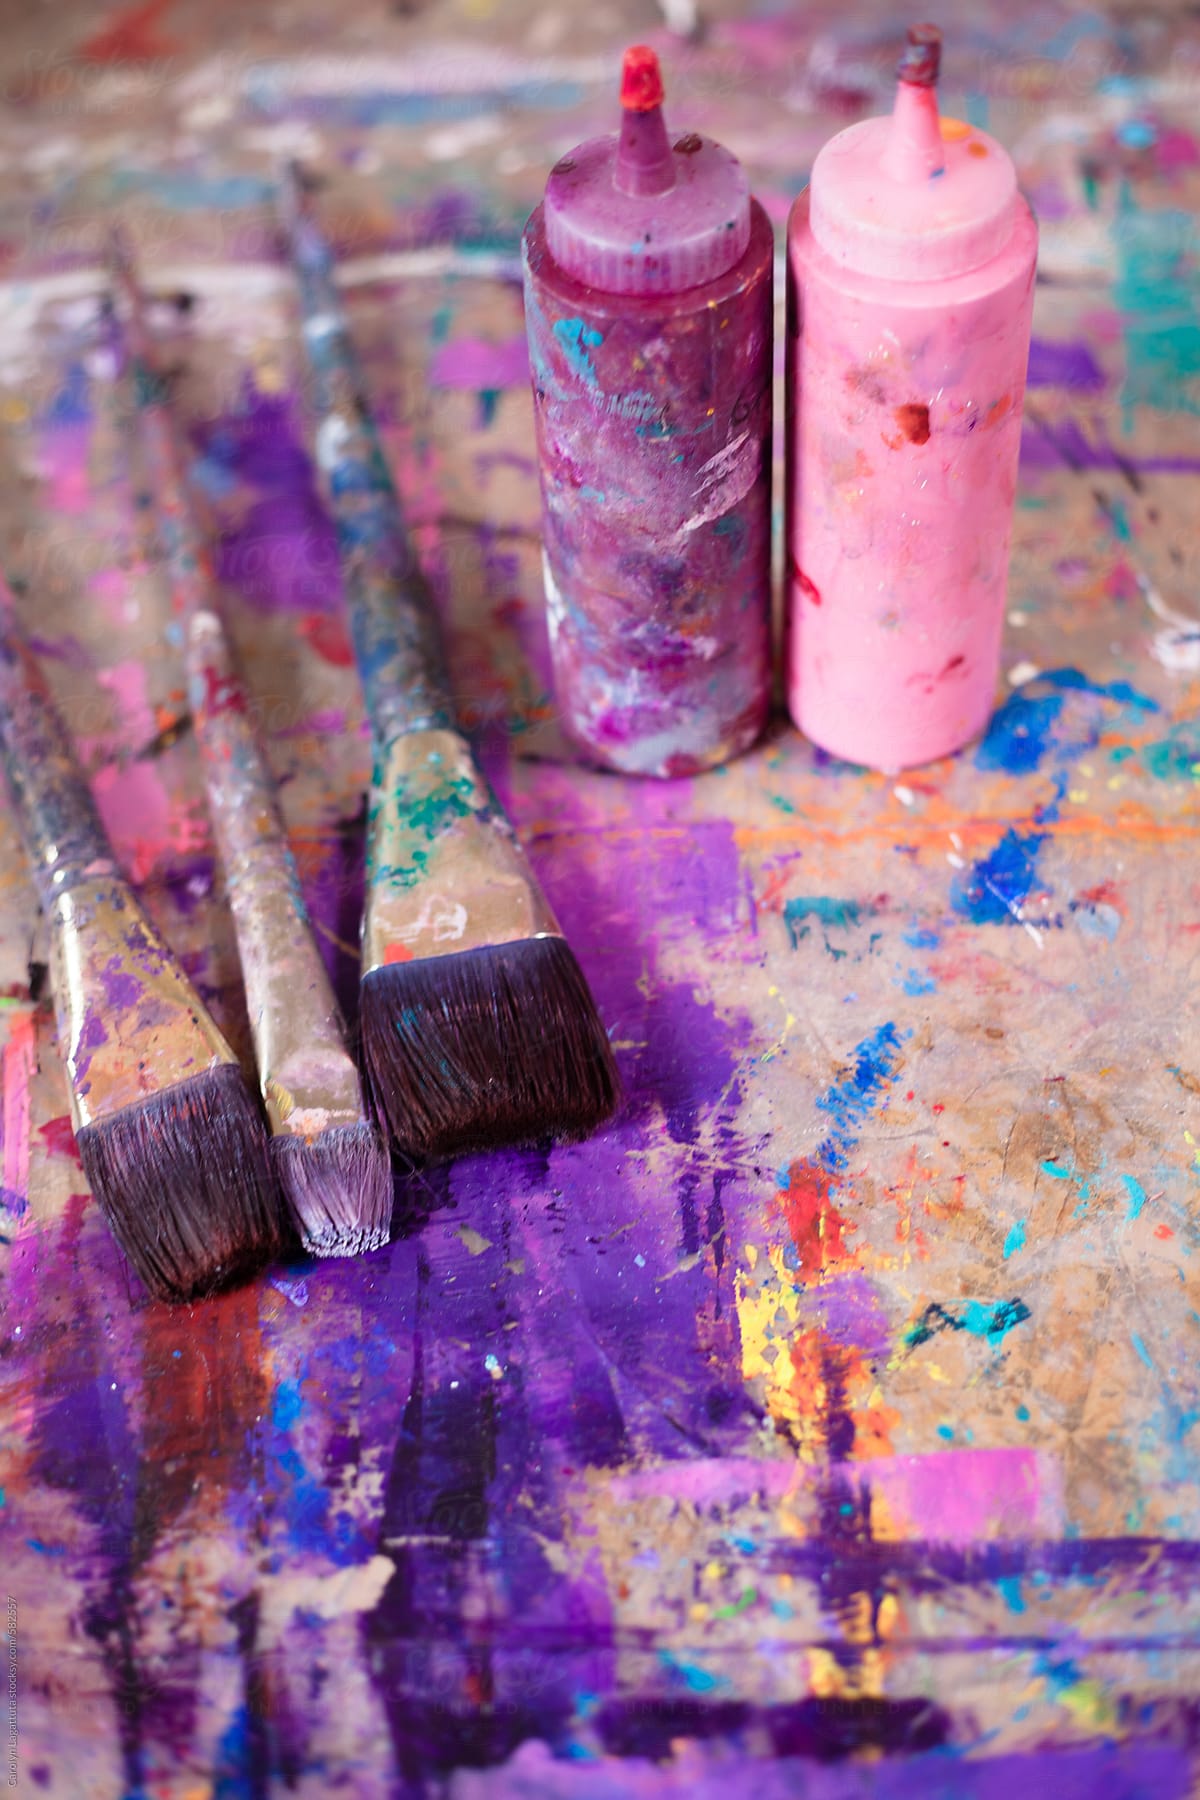 Used Paint Brushes Stained With All Colors In An Art Studio by